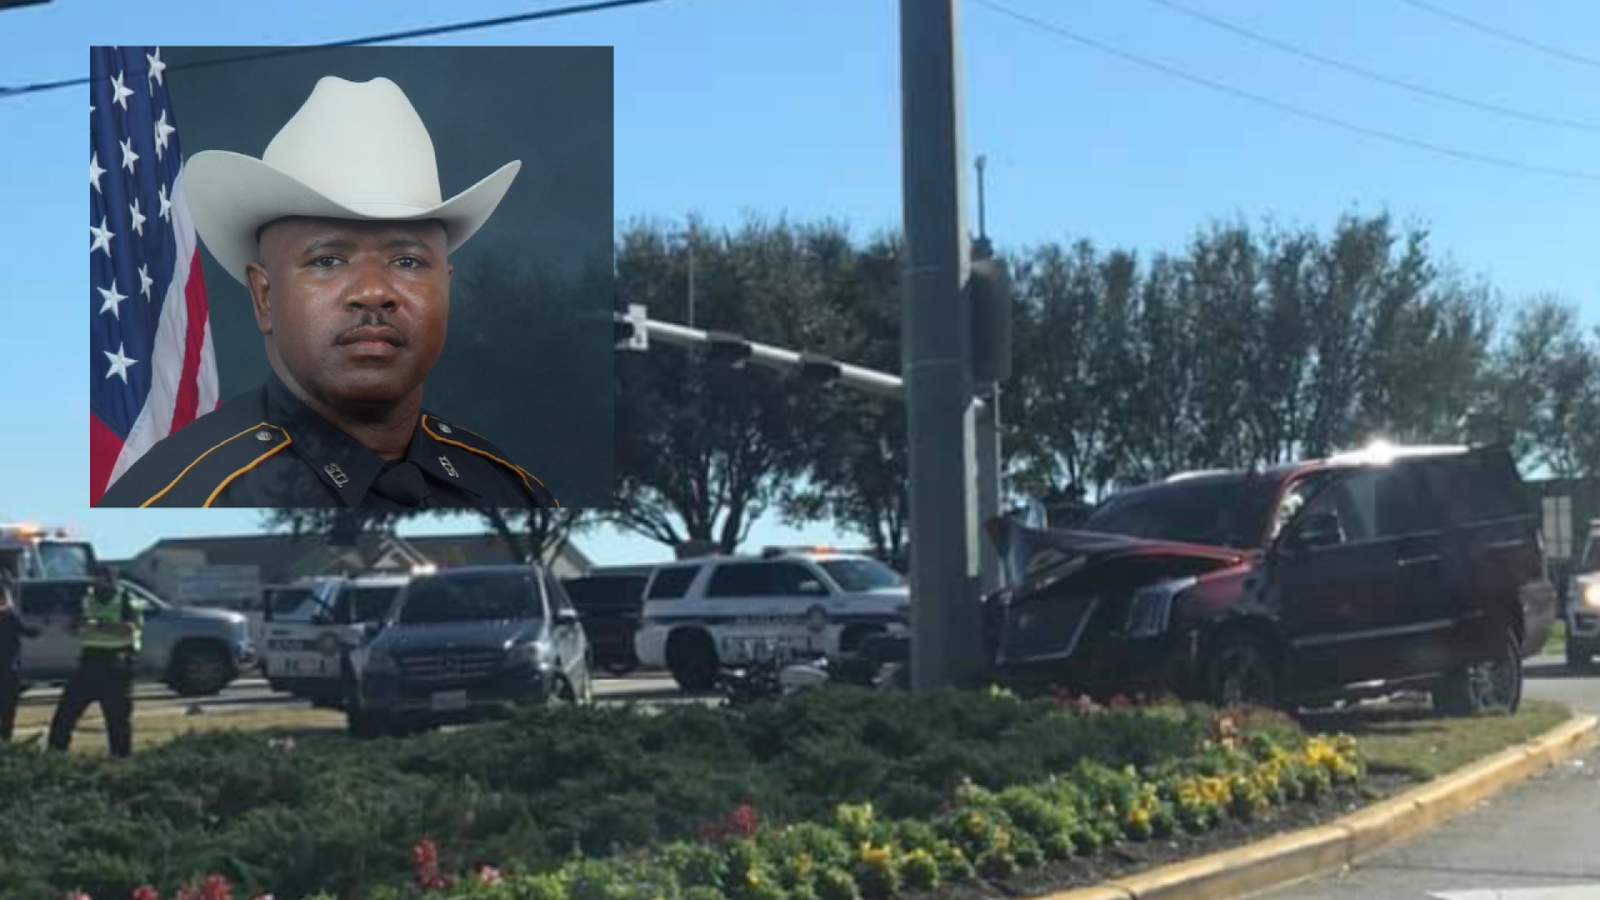 HSCO identifies Sgt.  Watson was killed off duty in a motorcycle accident in Pearland